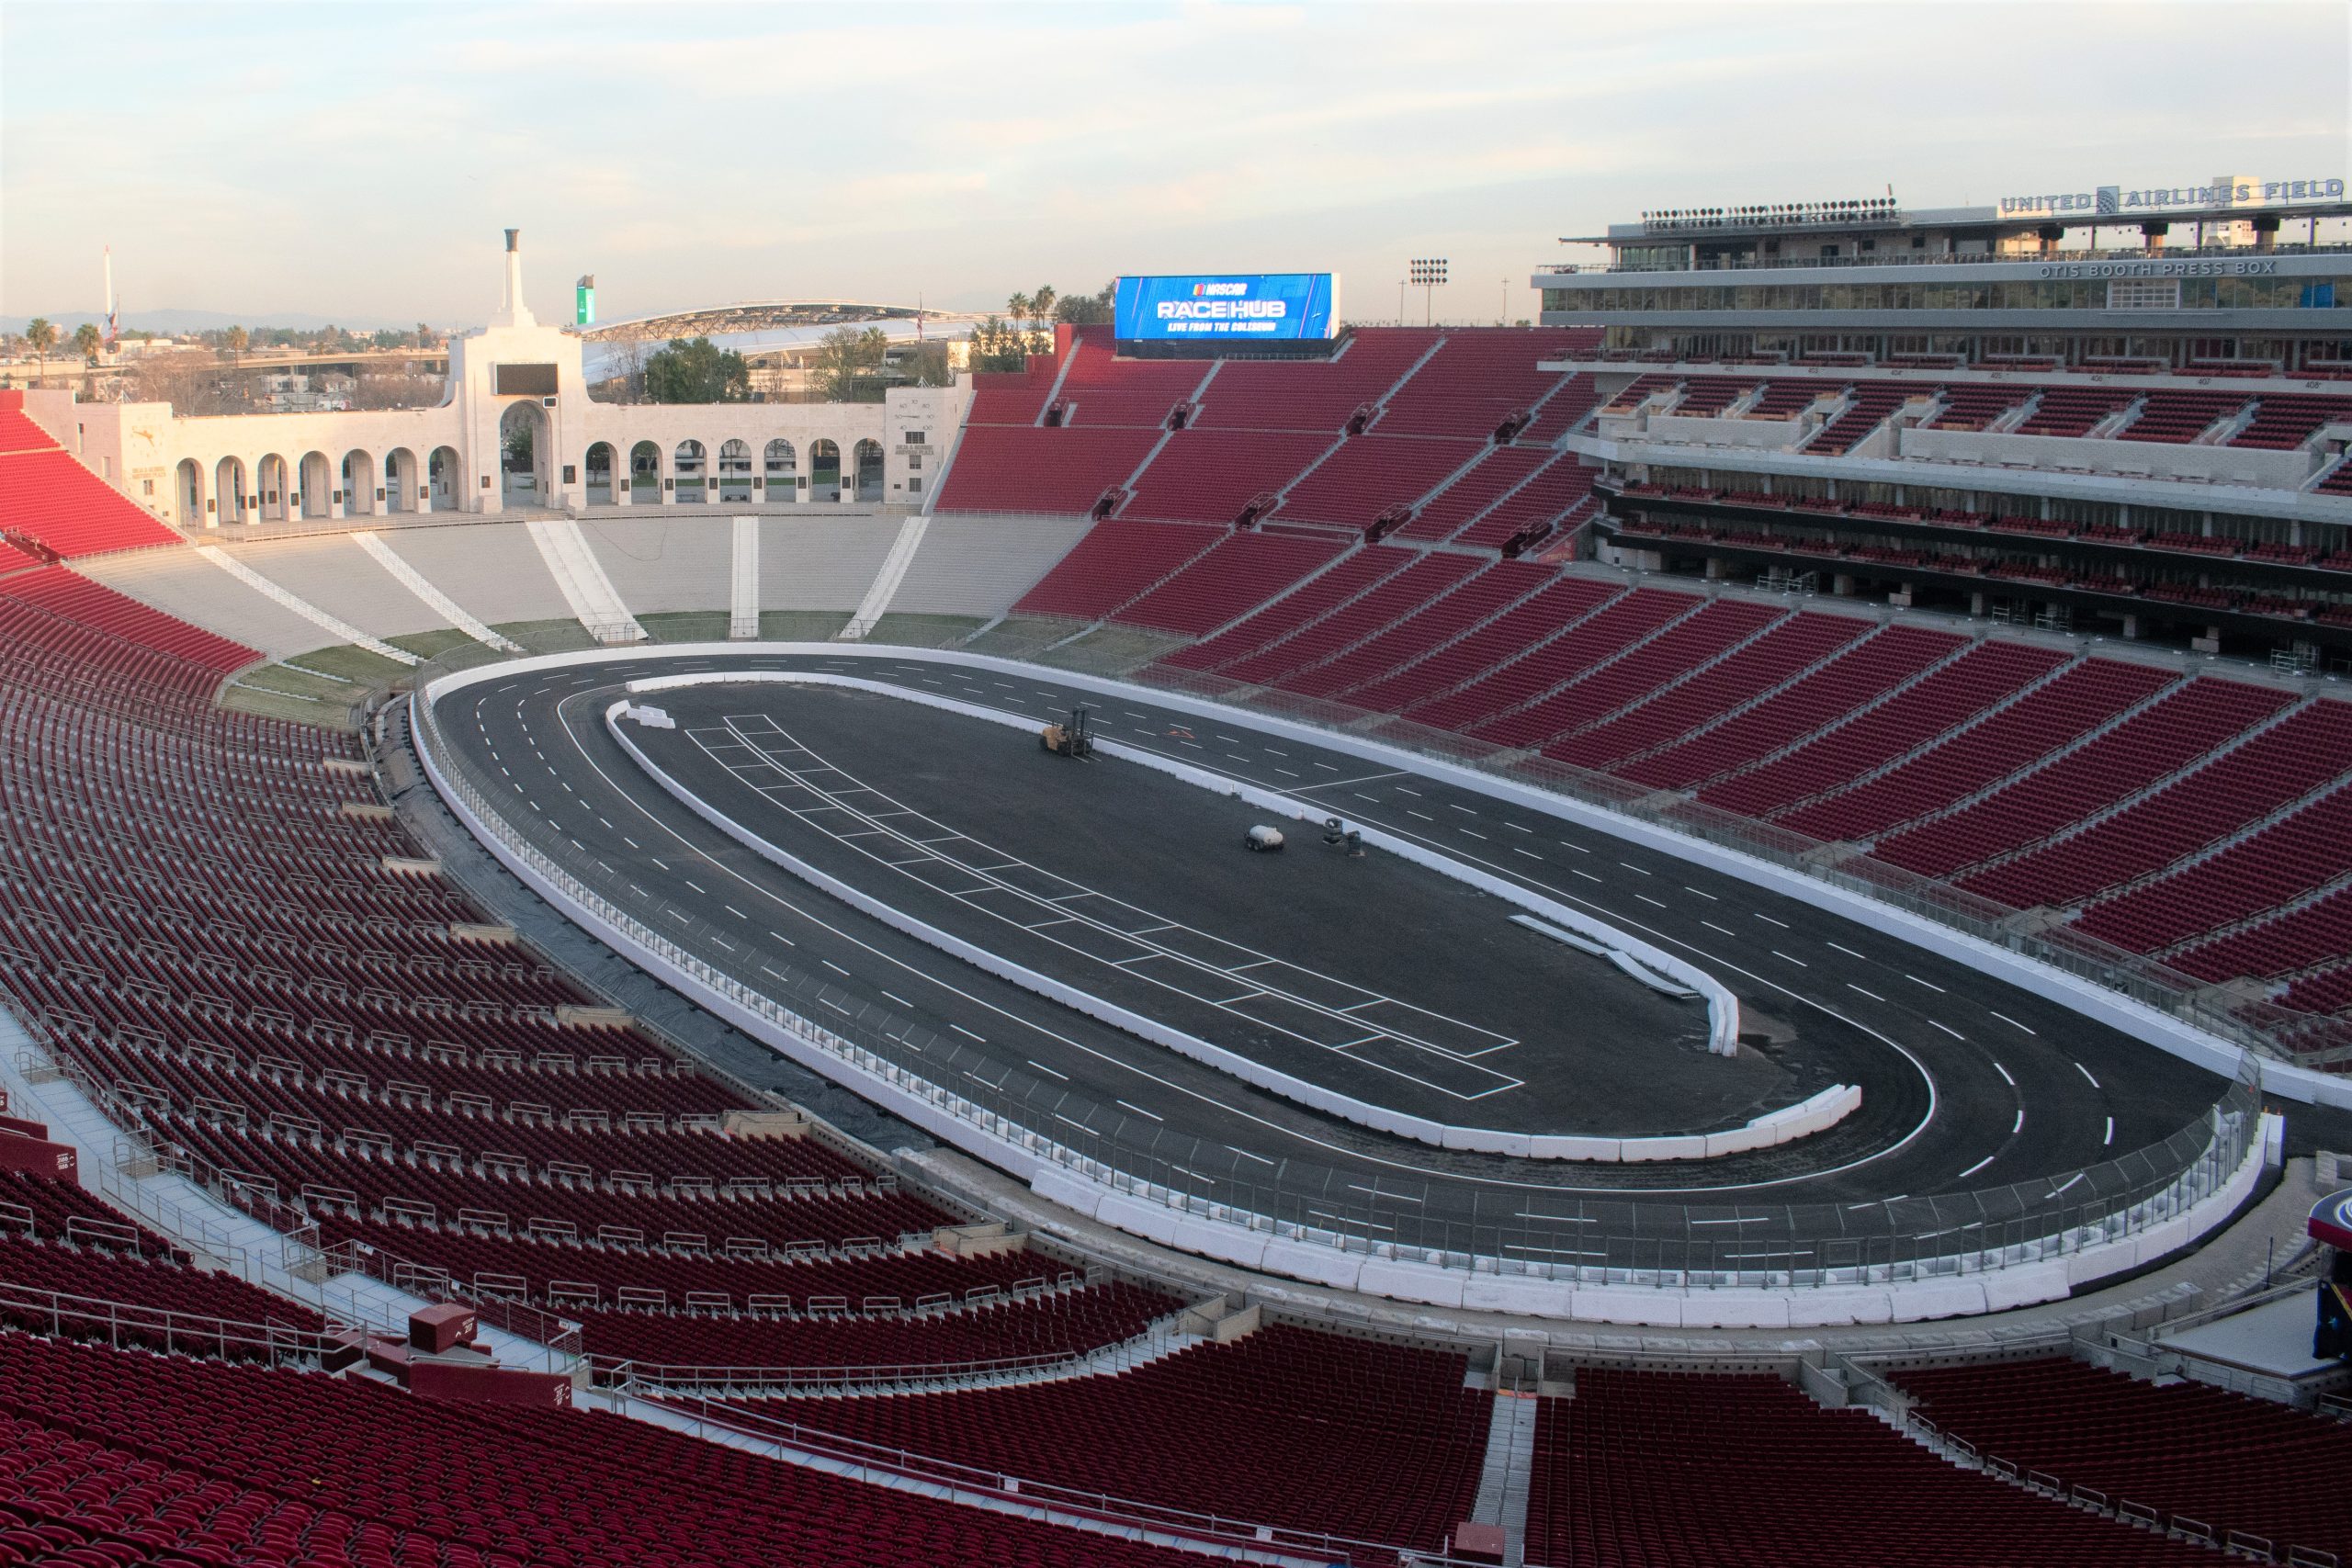 NASCAR is Racing in Los Angeles Memorial Coliseum Tonight—Here's Why